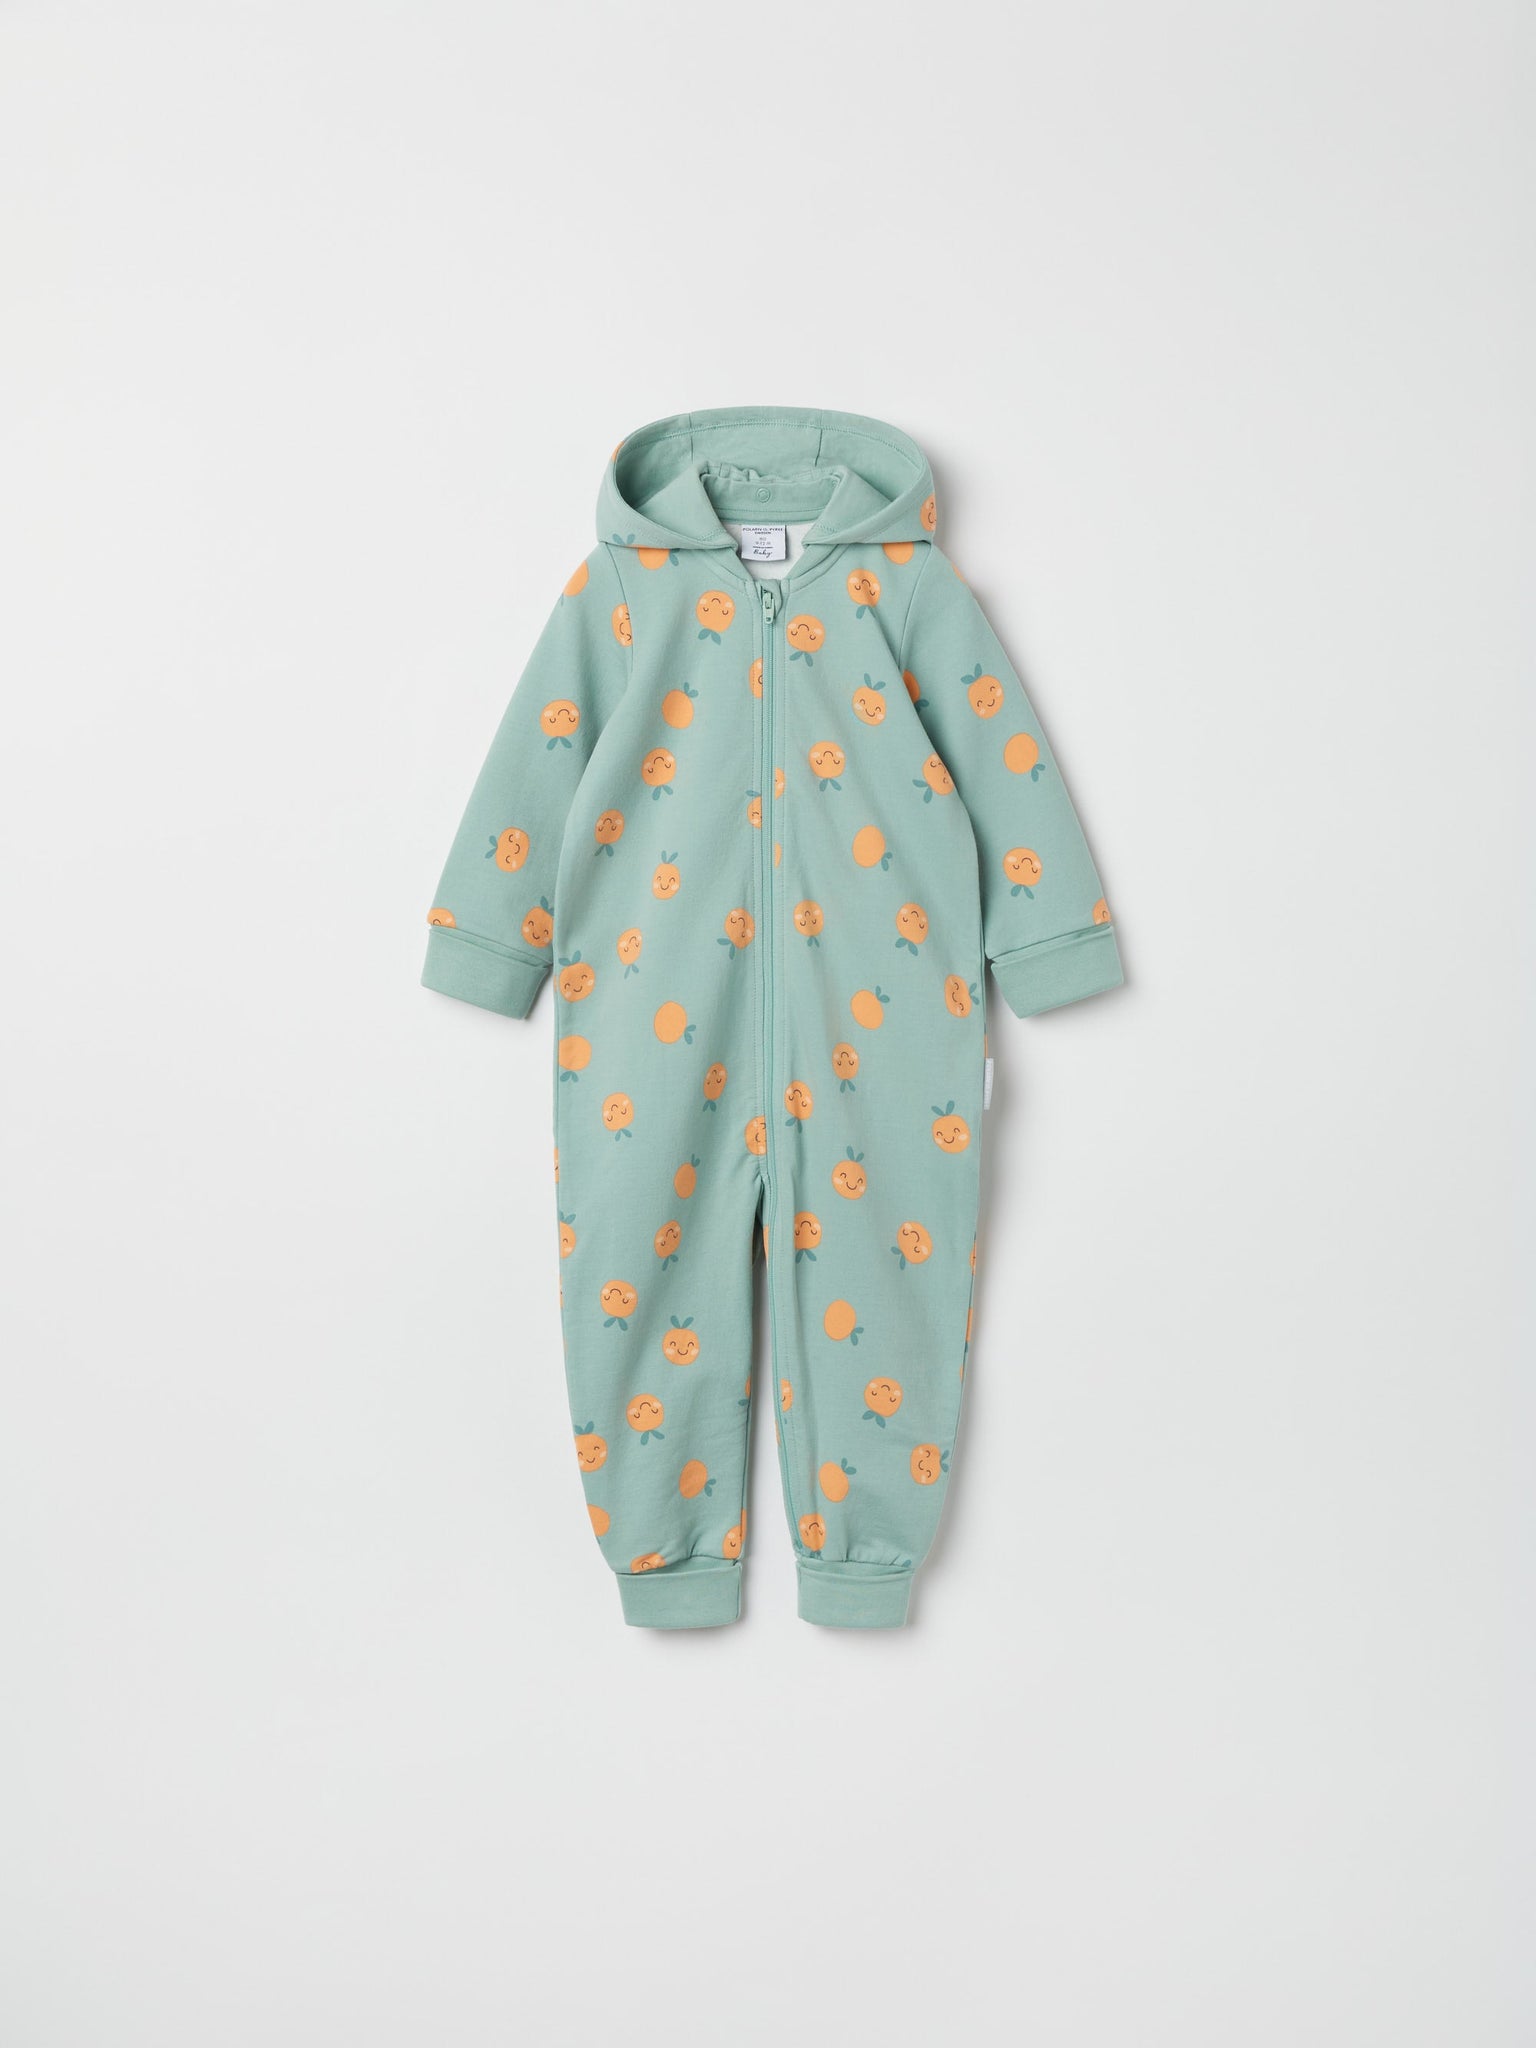 Apple Print Baby All-in-one from the Polarn O. Pyret baby collection. Ethically produced kids clothing.